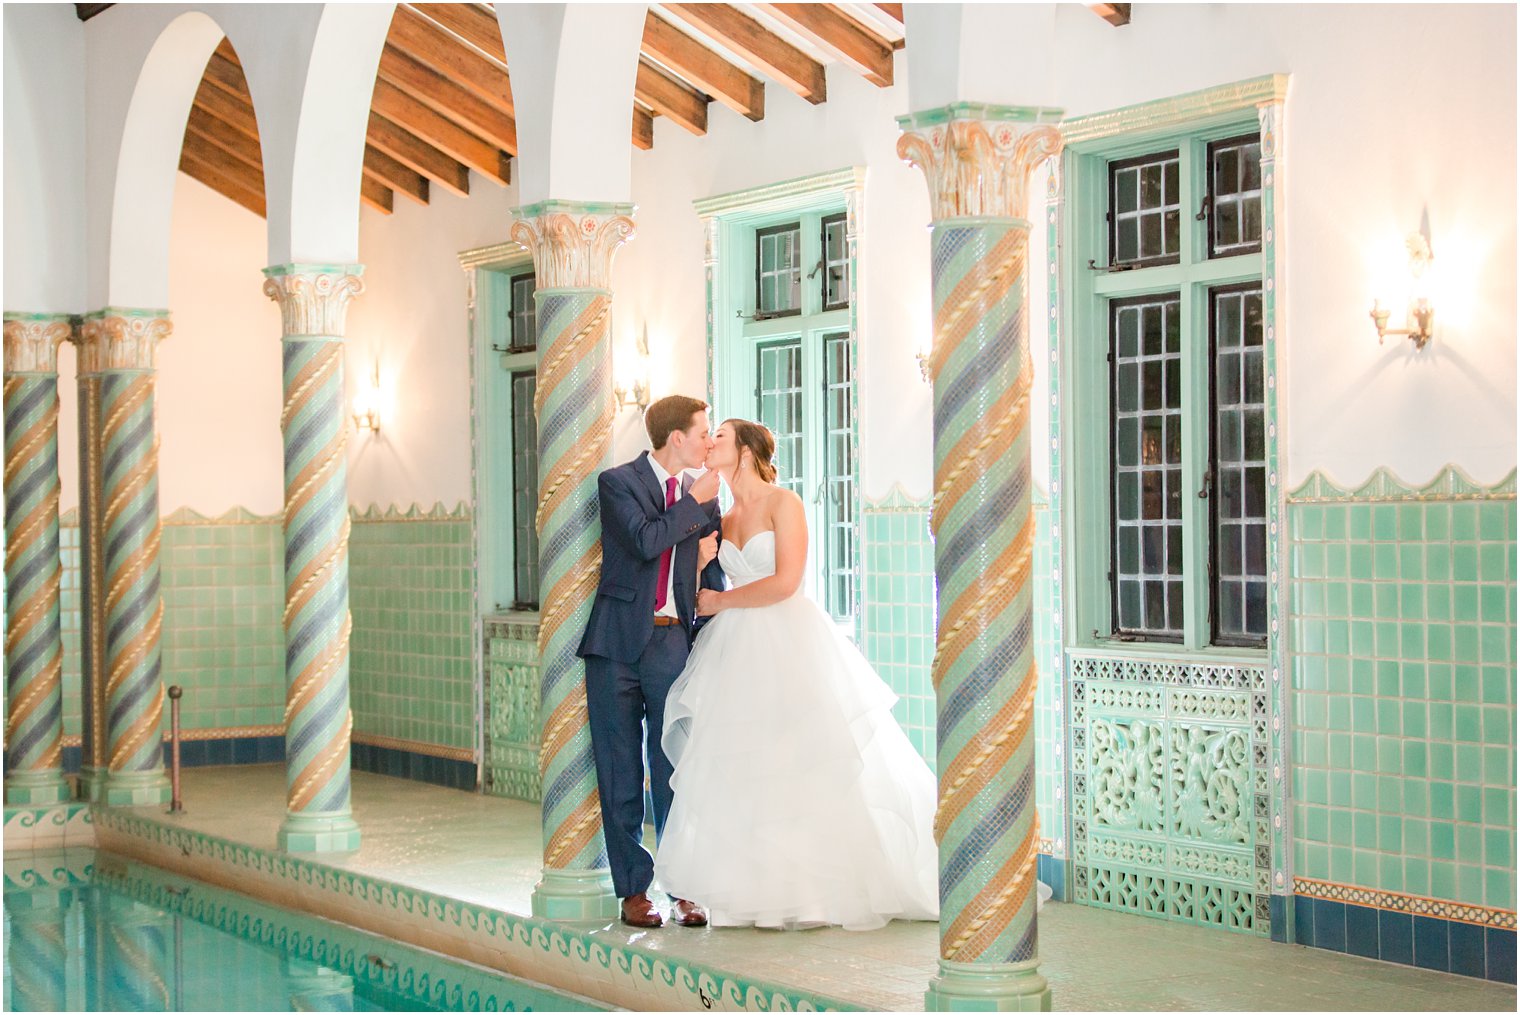 Beautiful bride and groom photo at Pleasantdale Chateau pool